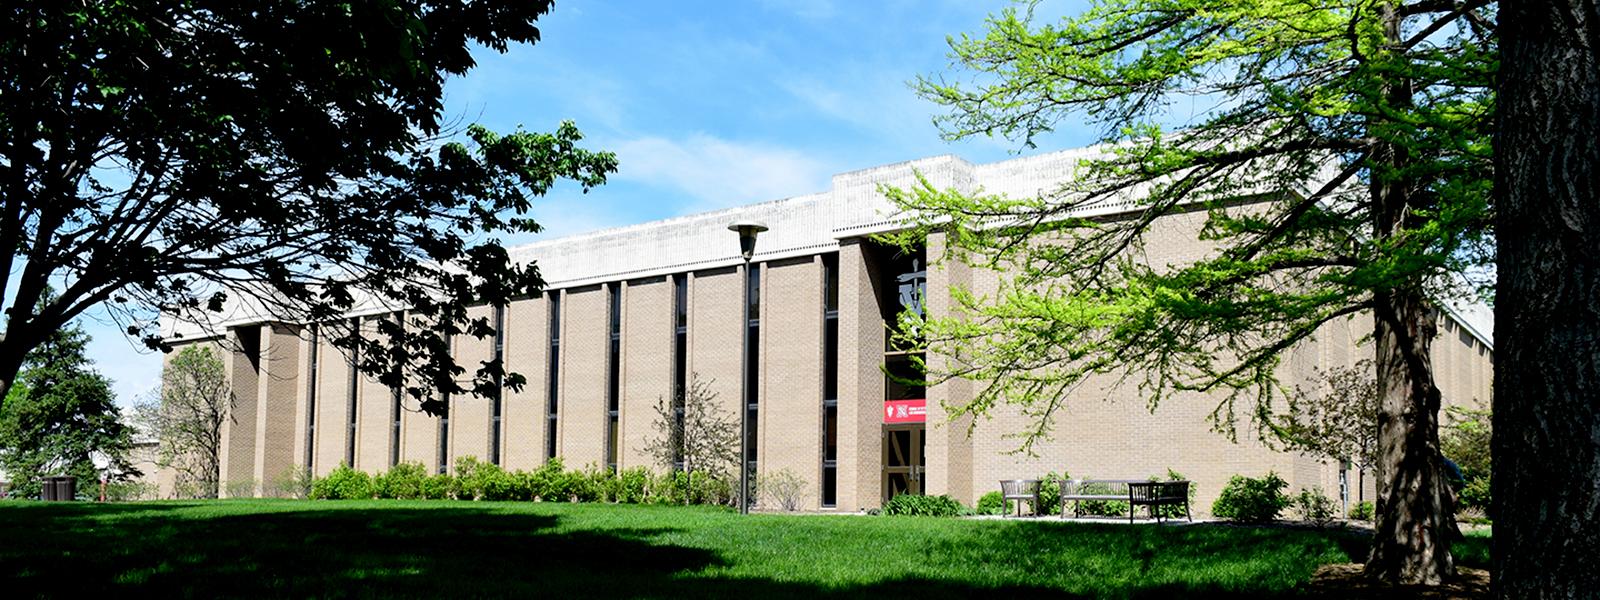 Exterior of the School of Veterinary Medicine and Biomedical Sciences building.